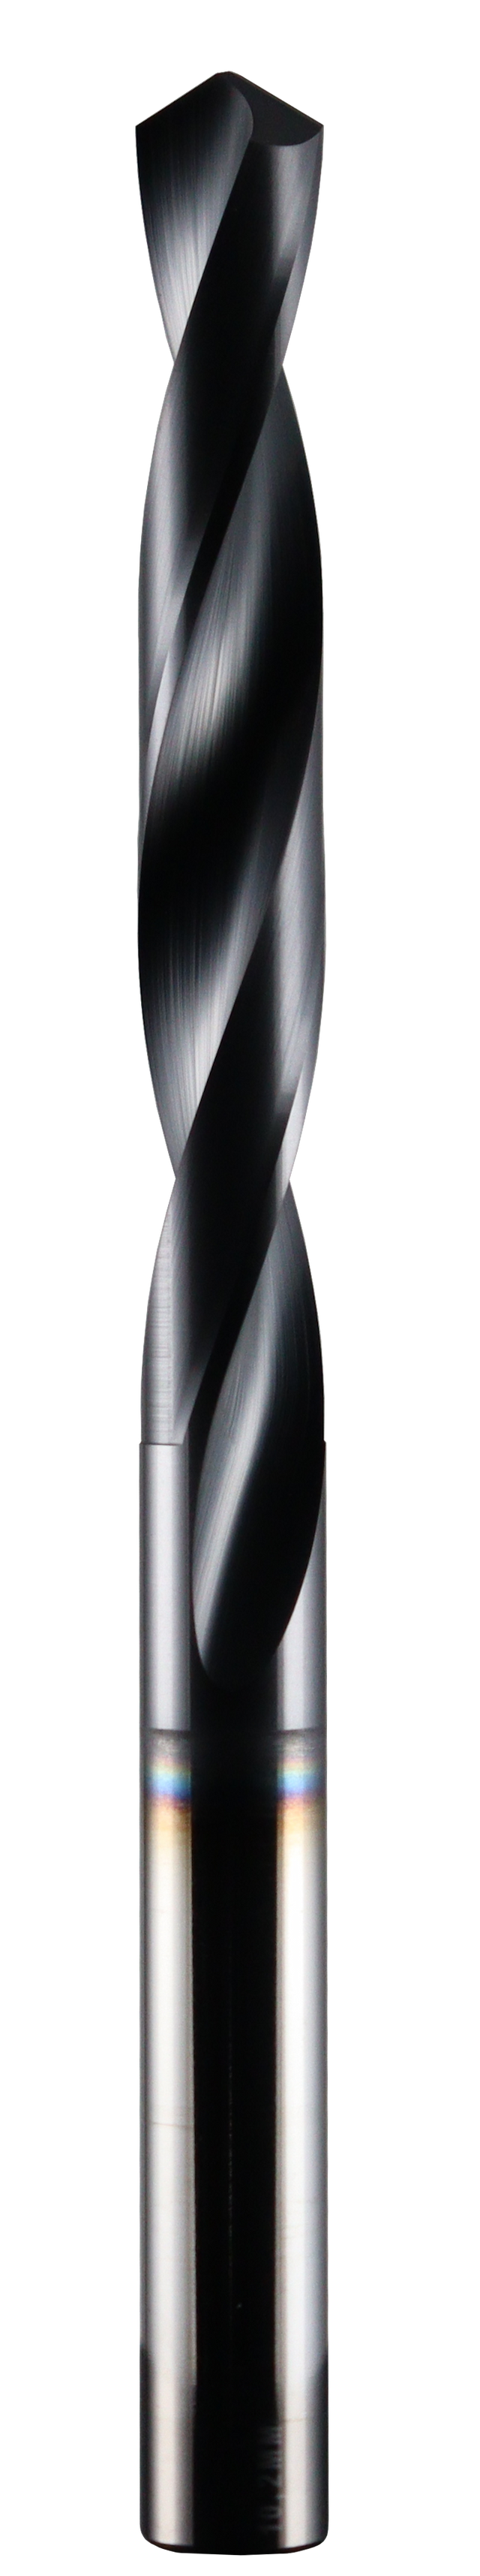 8.20mm Dia, 118 Degree Point, Solid Carbide Drill - 68351